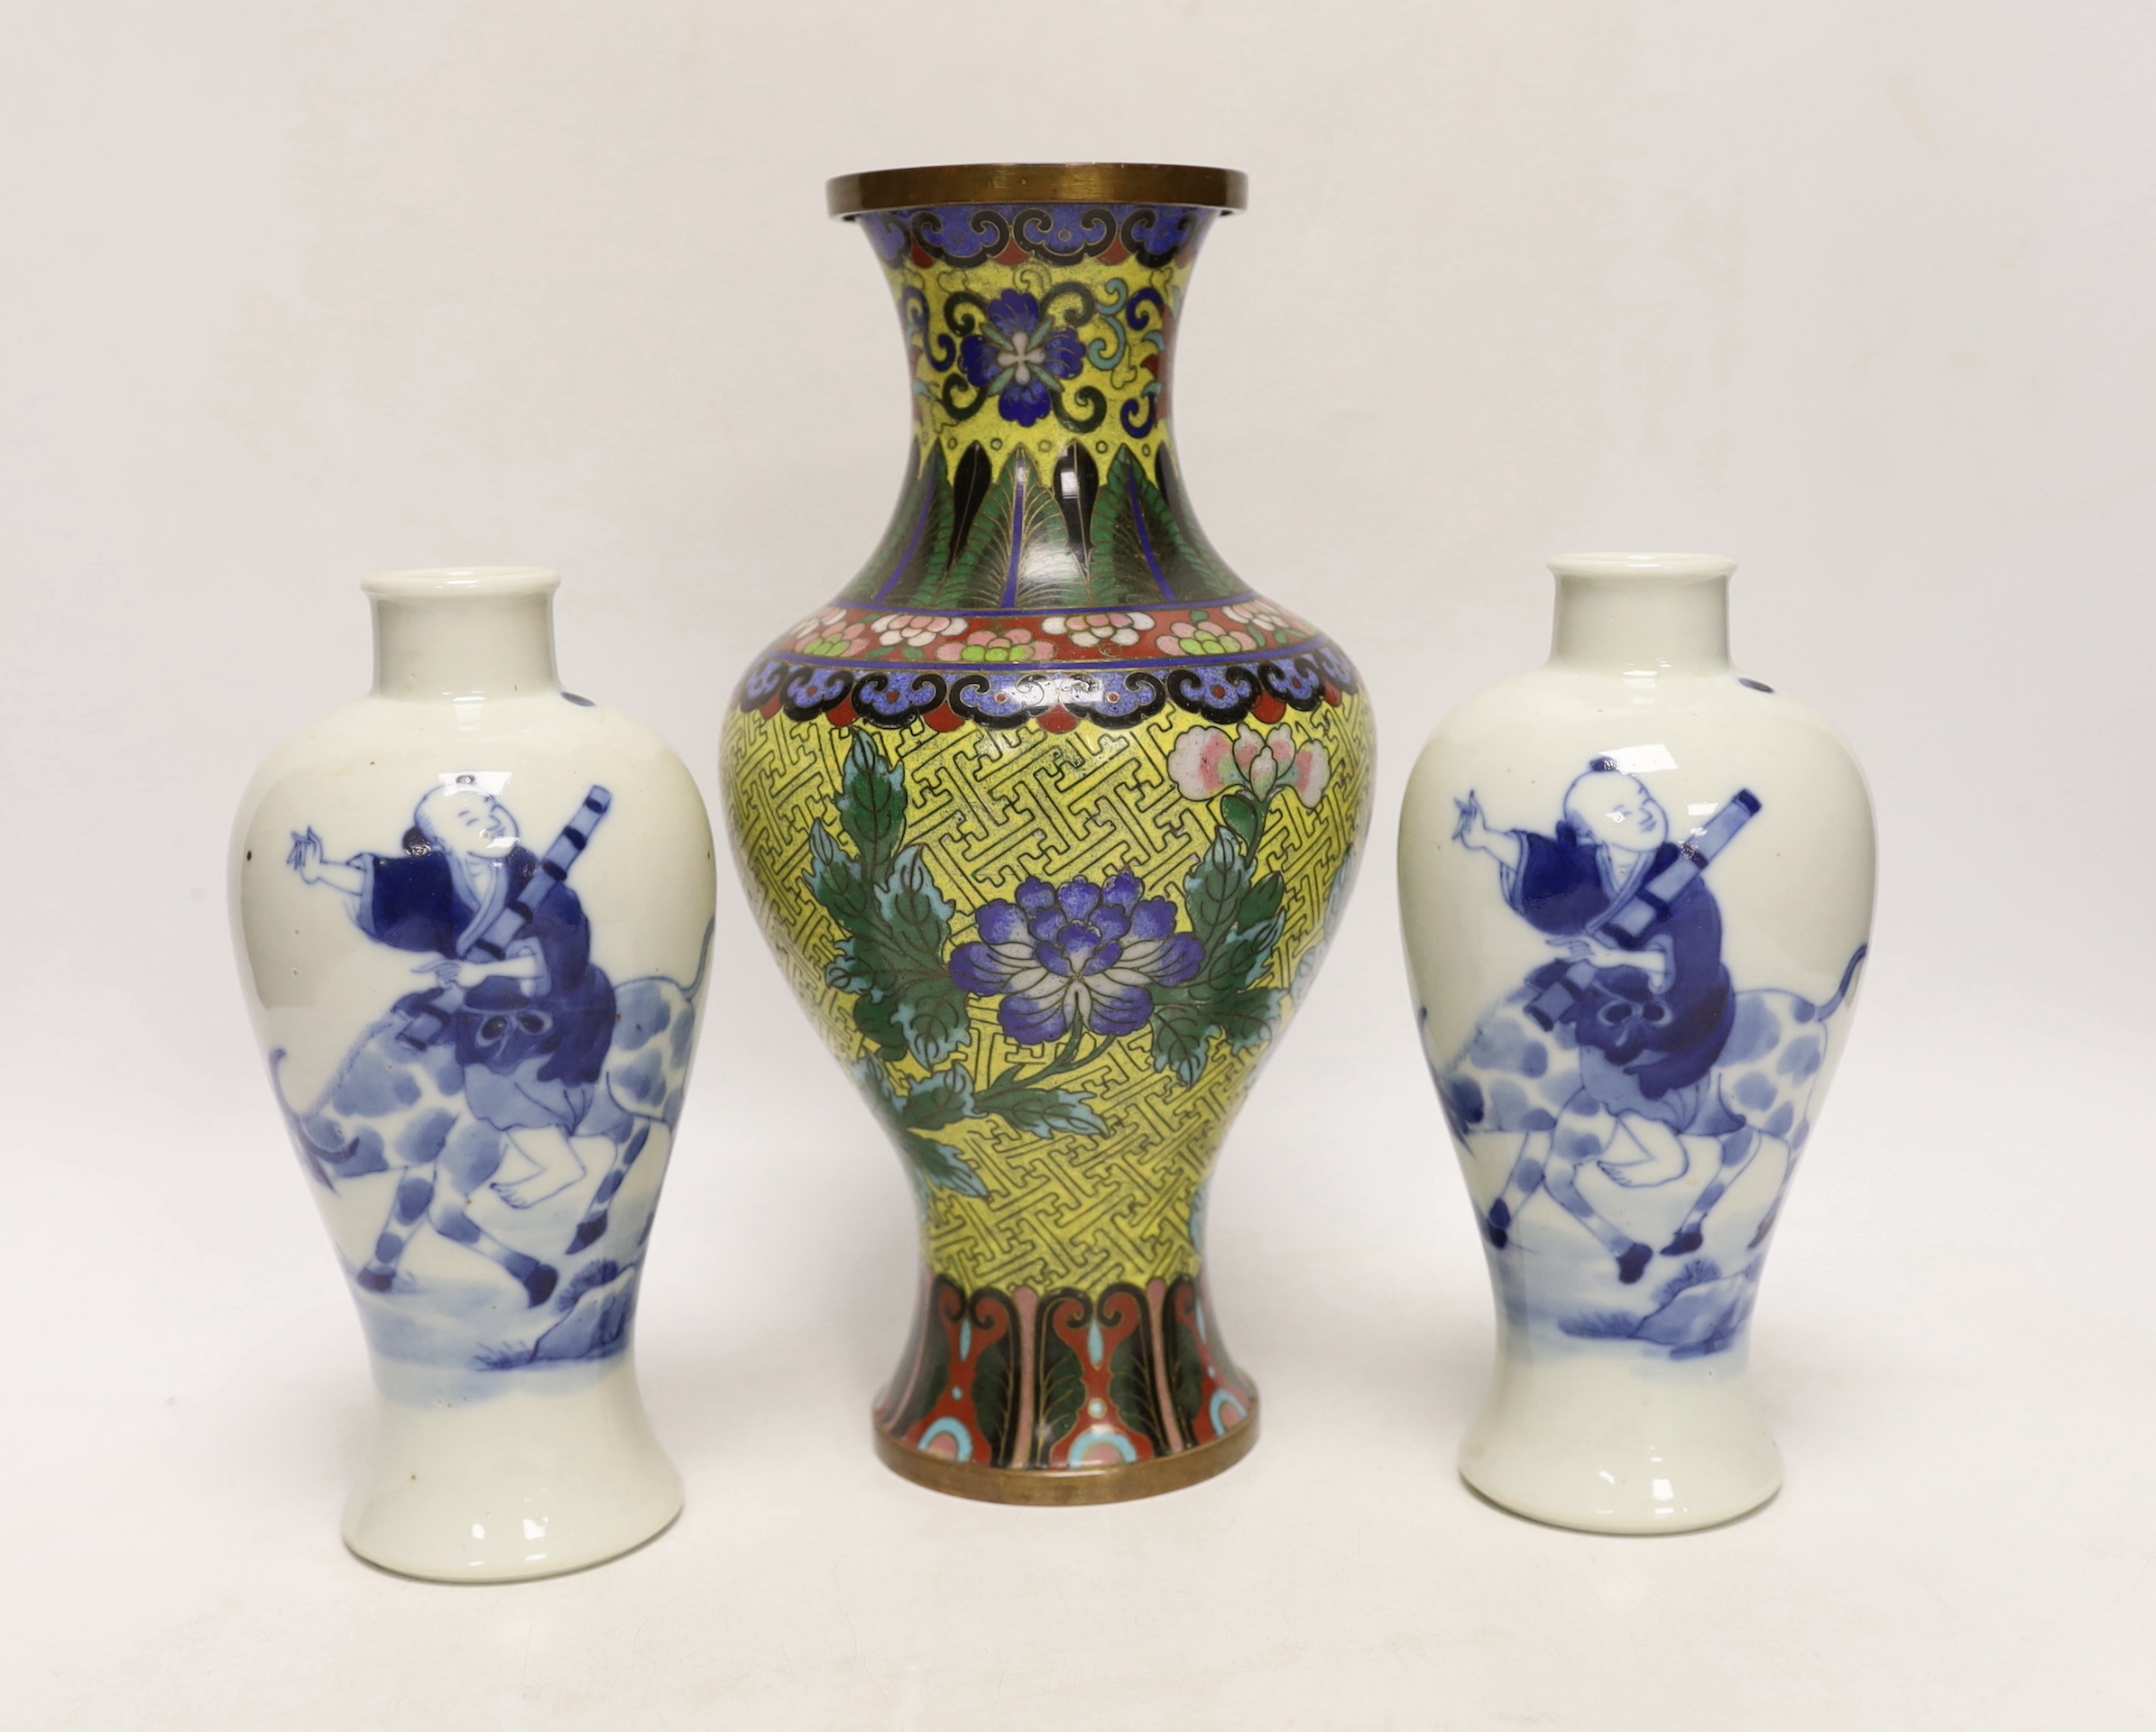 A pair of Chinese blue and white vases, c.1900 and a Chinese cloisonné enamel vase, largest 24cm